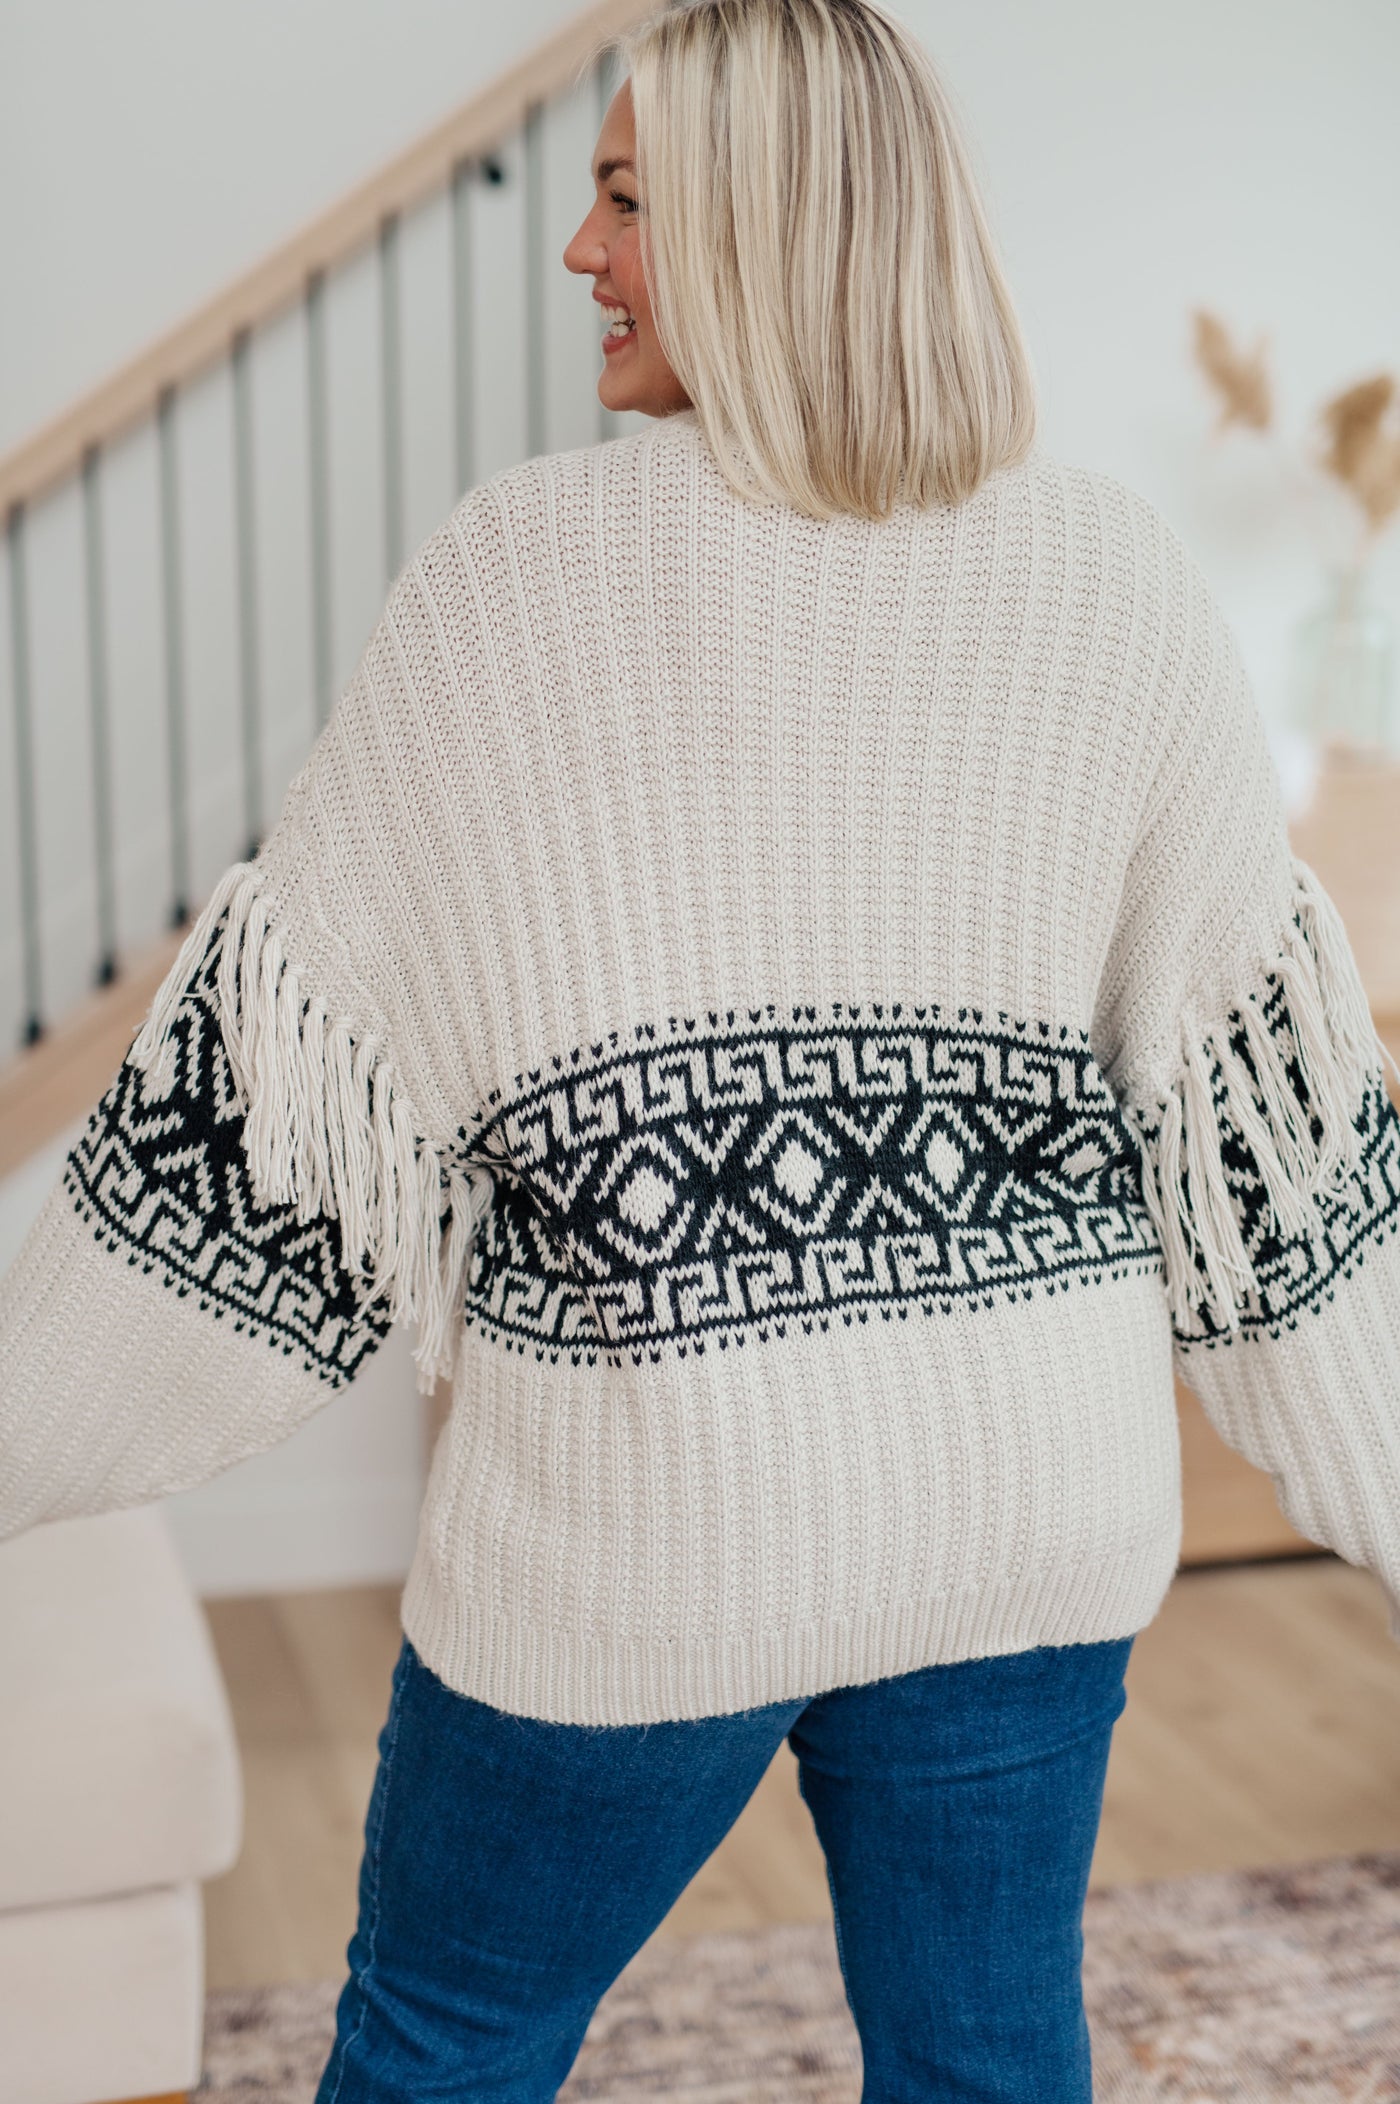 This Don't Waver Fringe Detail Sweater is the perfect piece to add a touch of style to any outfit